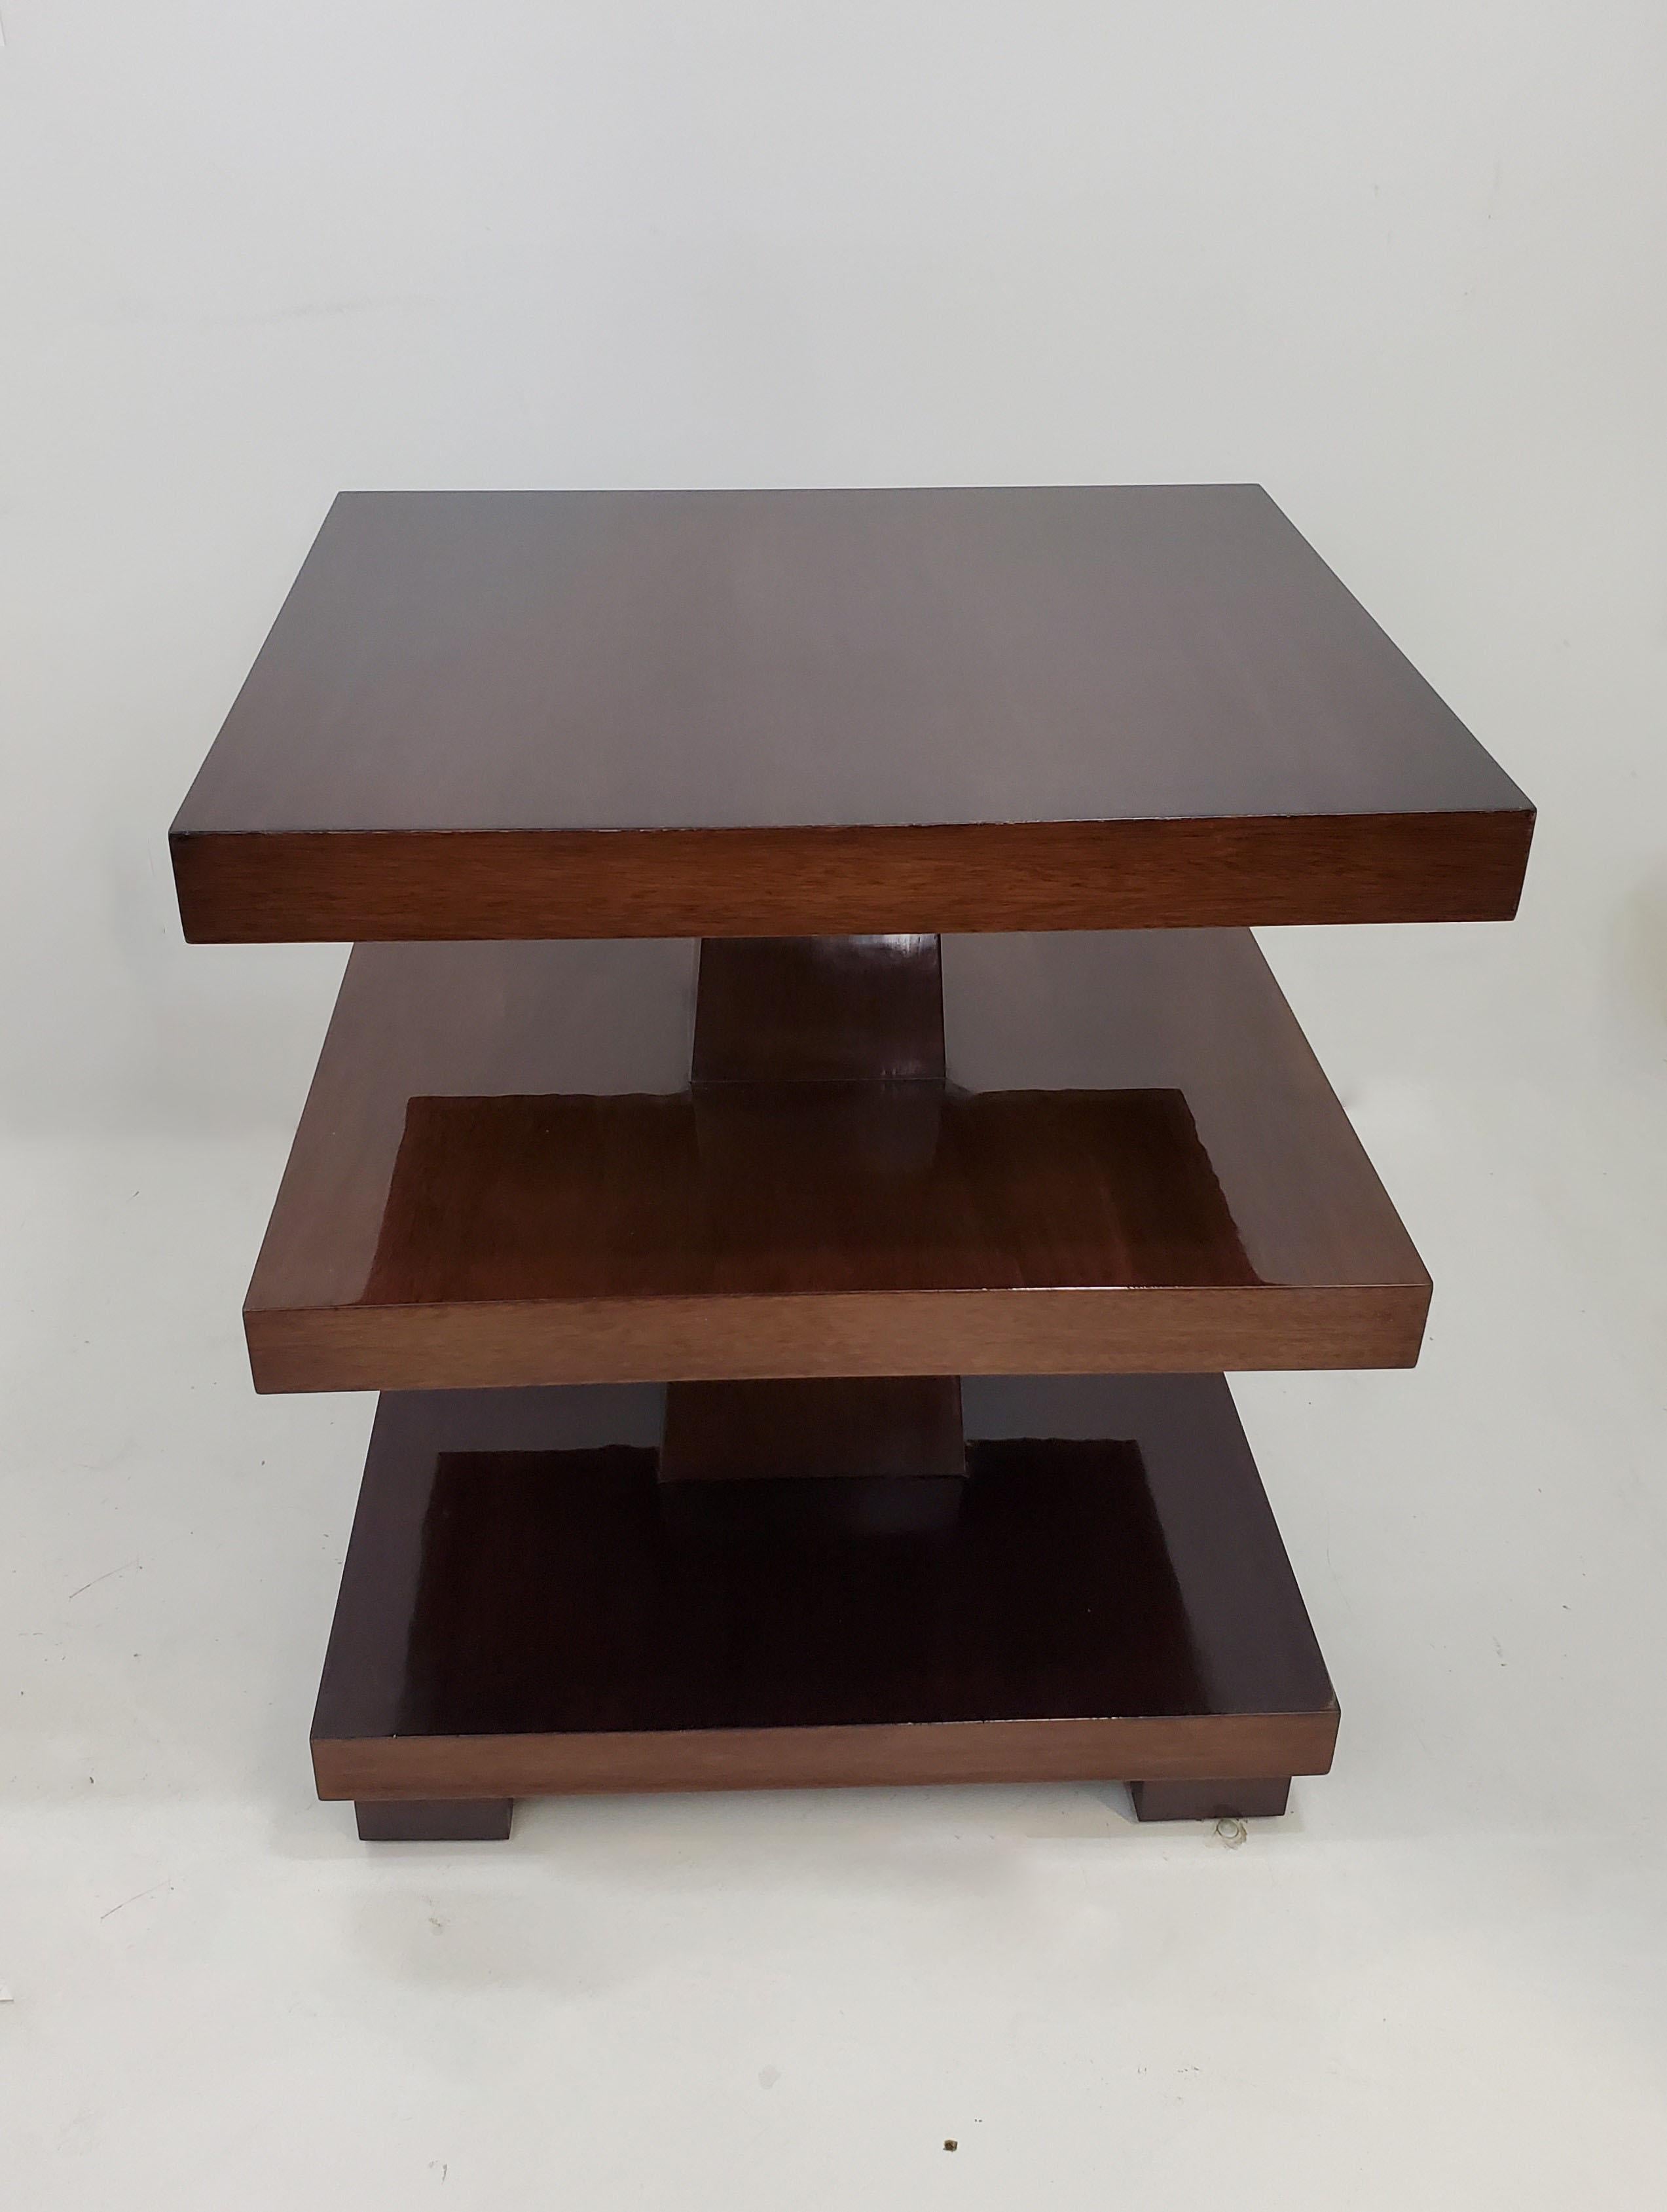 An elegant and imposing highly sculptural, Art Deco revival rectangular three tiered table of cubist design in a deep cognac /dark amber colored mahogany with central shaft dissecting the shelves and the whole raised on cube feet.
The angular form